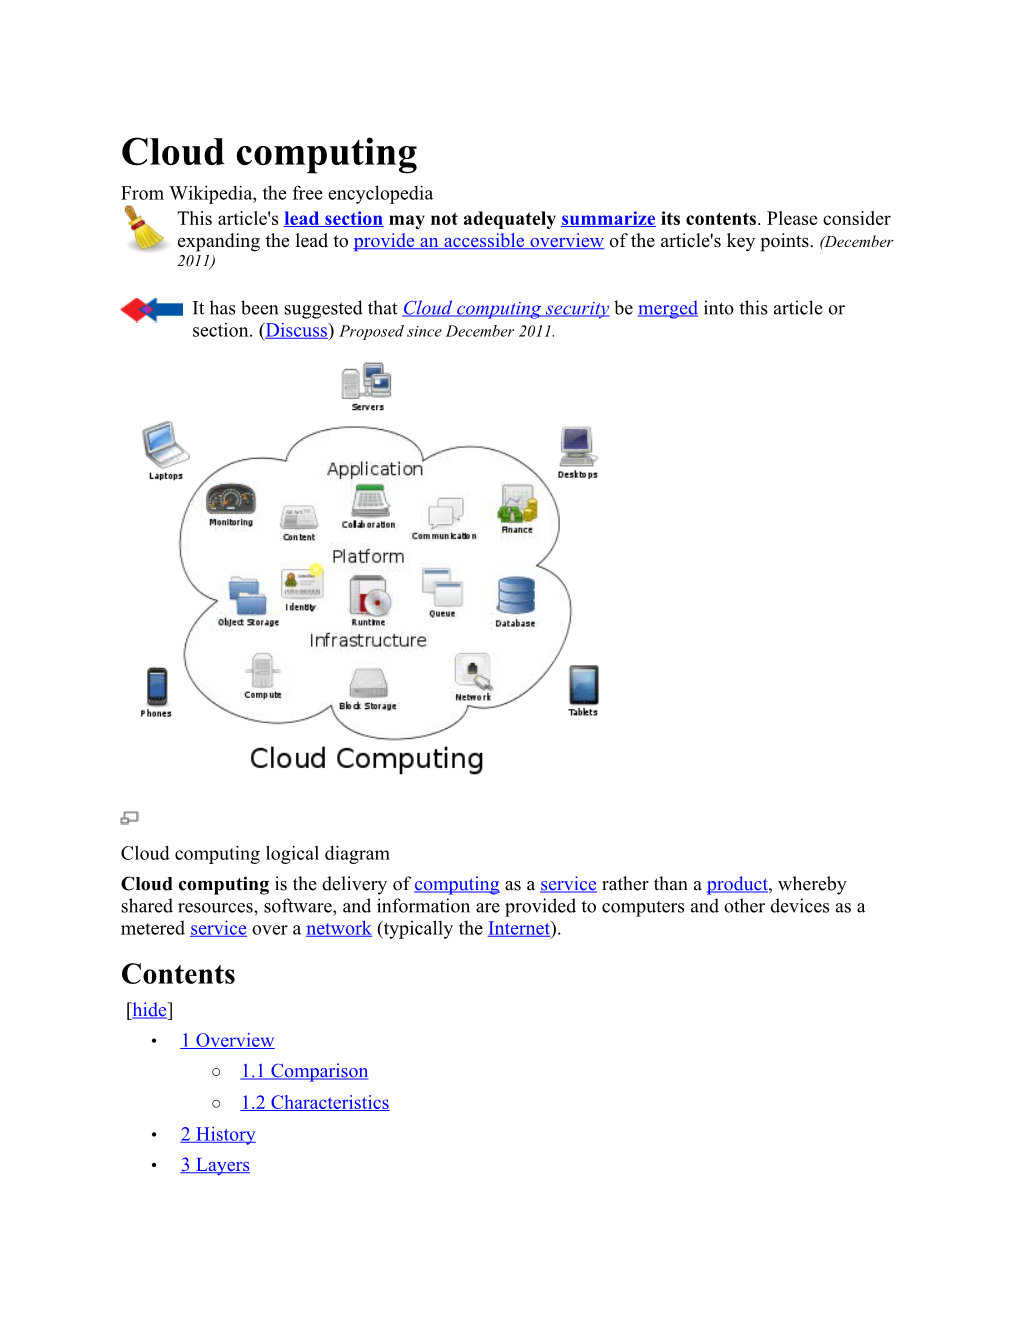 Cloud Computing from Wikipedia, the Free Encyclopedia This Article's Lead Section May Not Adequately Summarize Its Contents